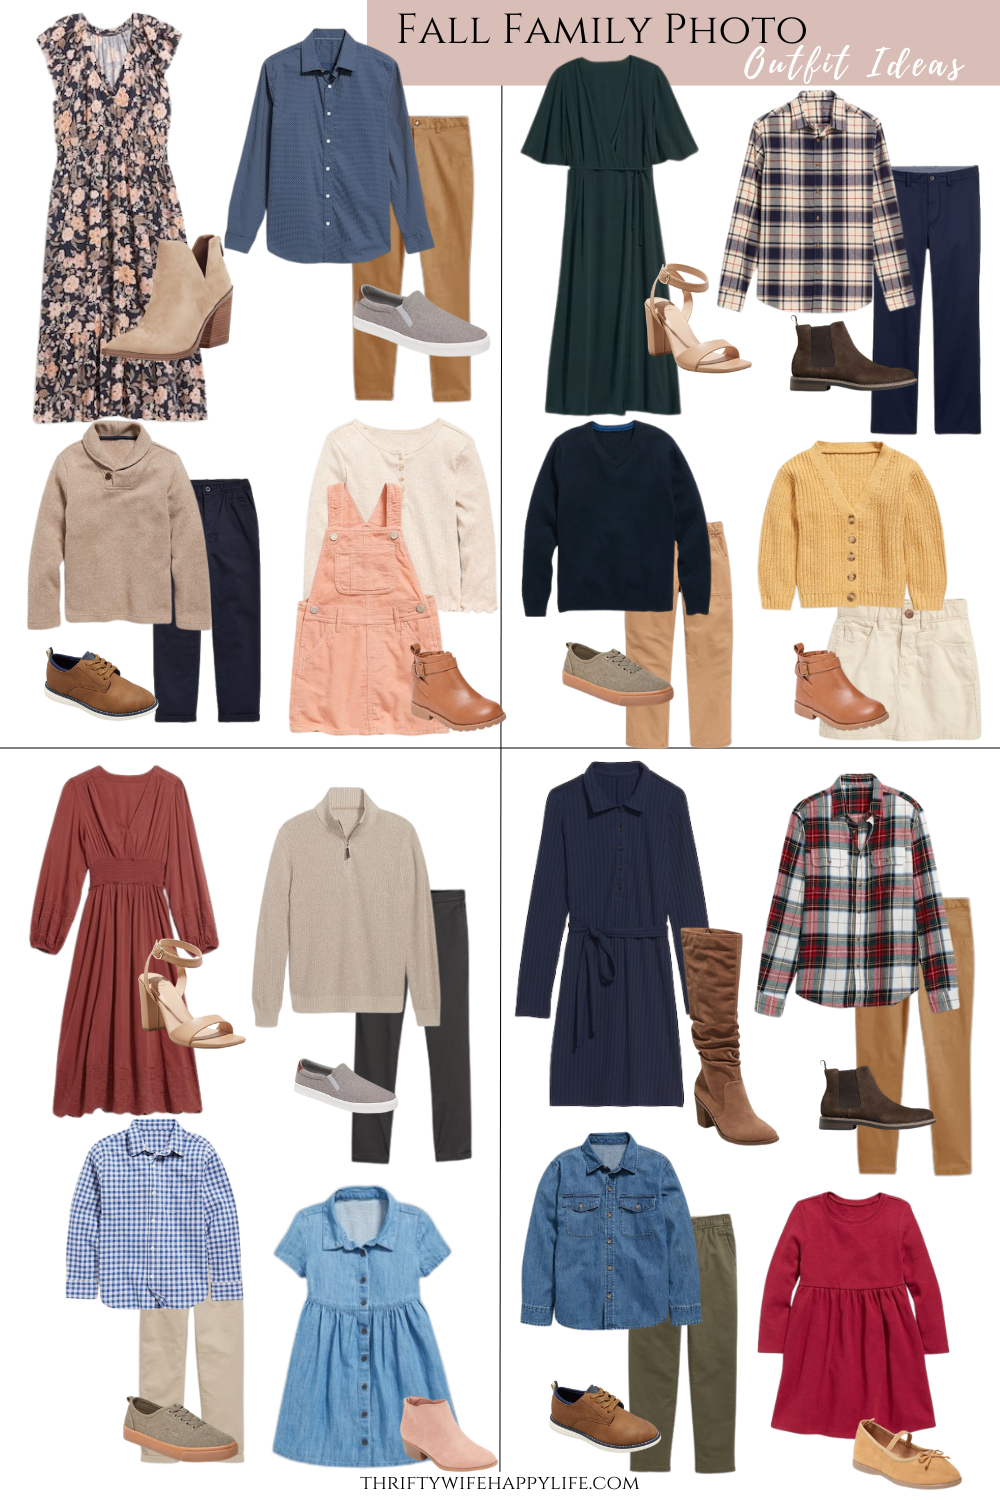 Affordable Family Photo Fall Outfit Ideas - Thrifty Wife Happy Life